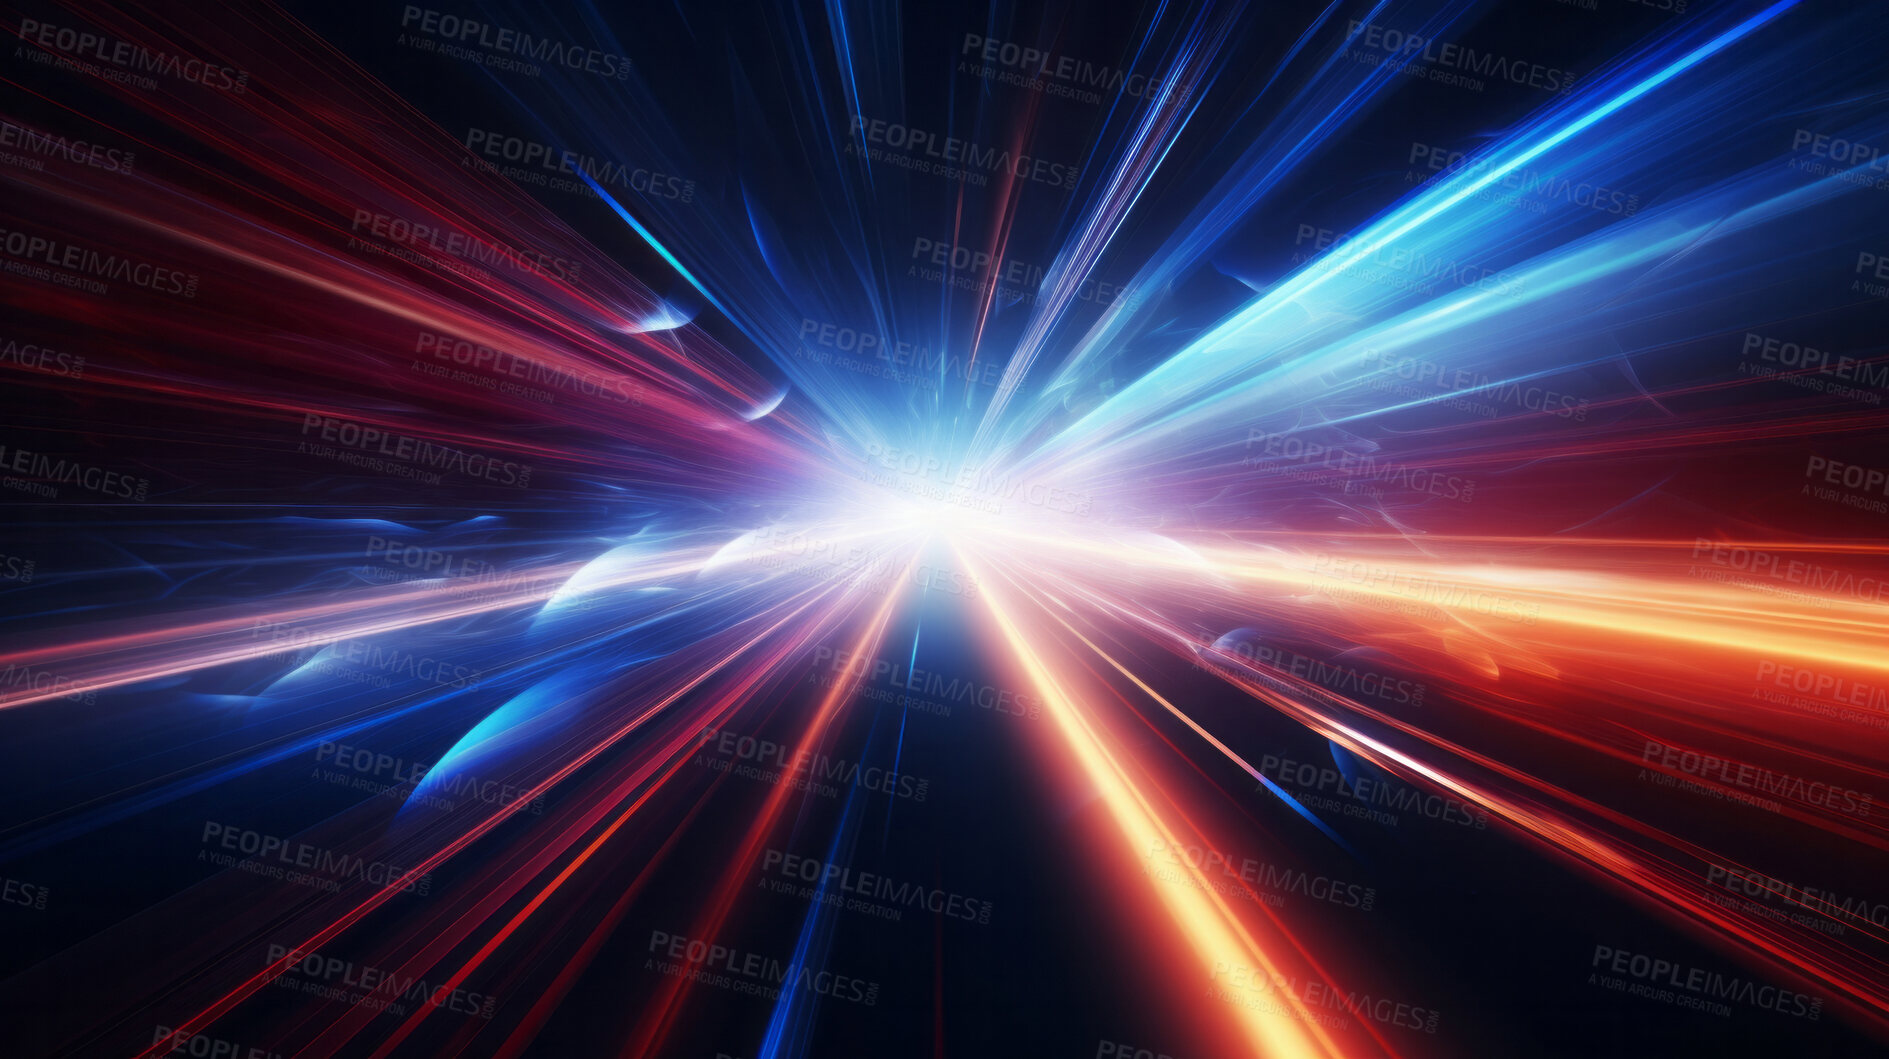 Buy stock photo Futuristic speed motion with blue and red rays of light abstract background